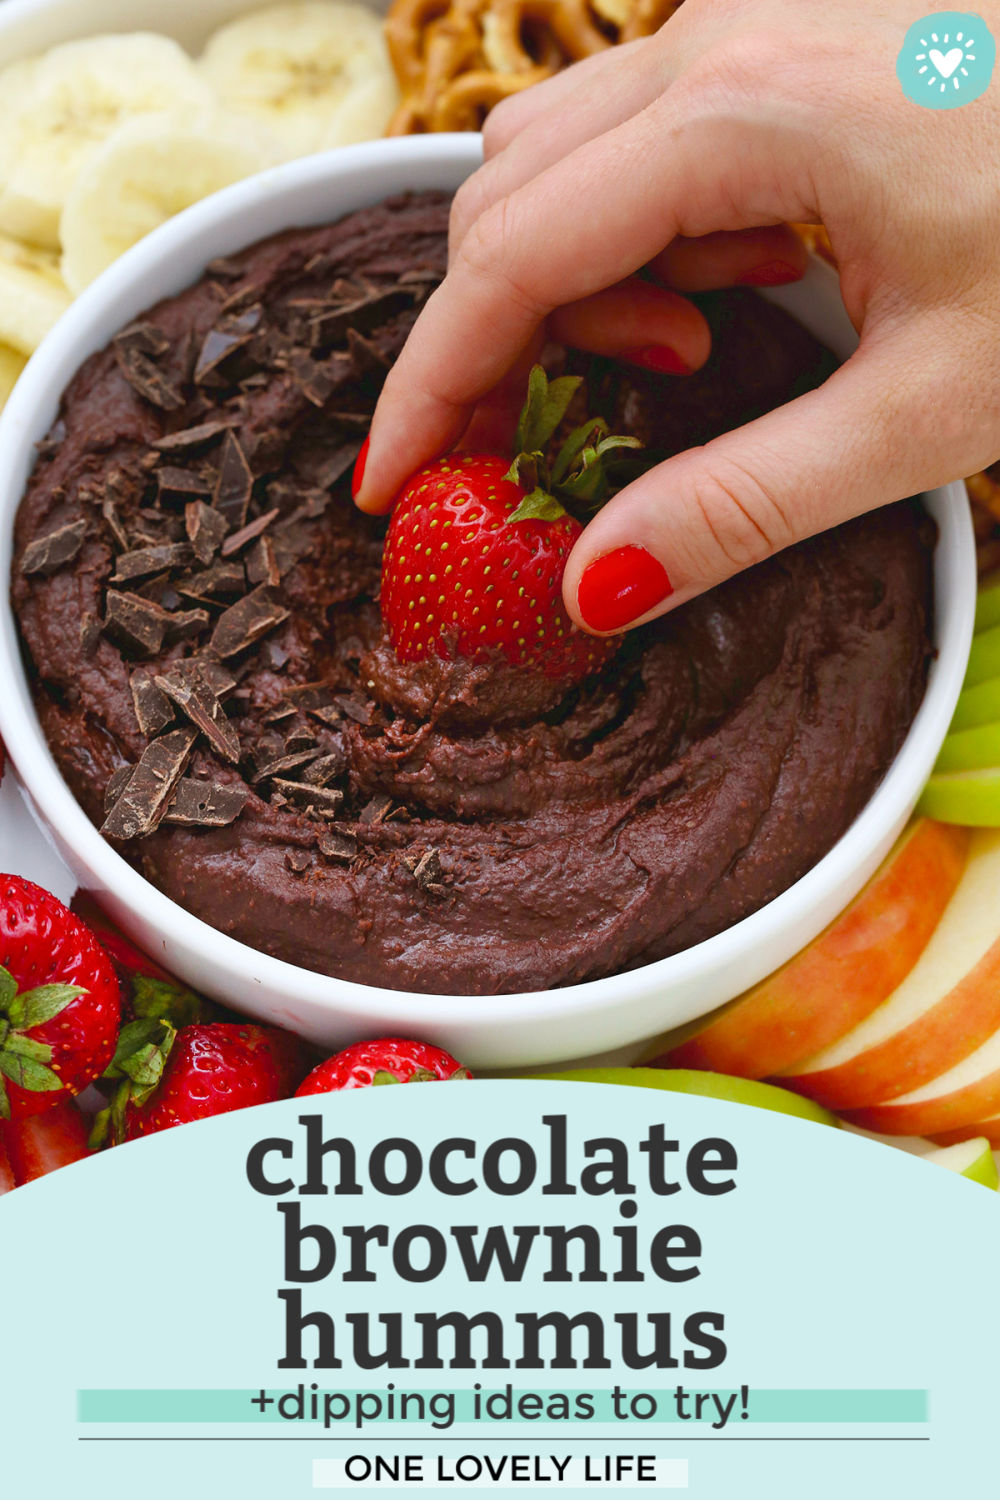 A strawberry being dipped into chocolate brownie hummus on a fruit plate with text overlay that reads "Chocolate brownie hummus +dipping ideas to try! One Lovely Life"